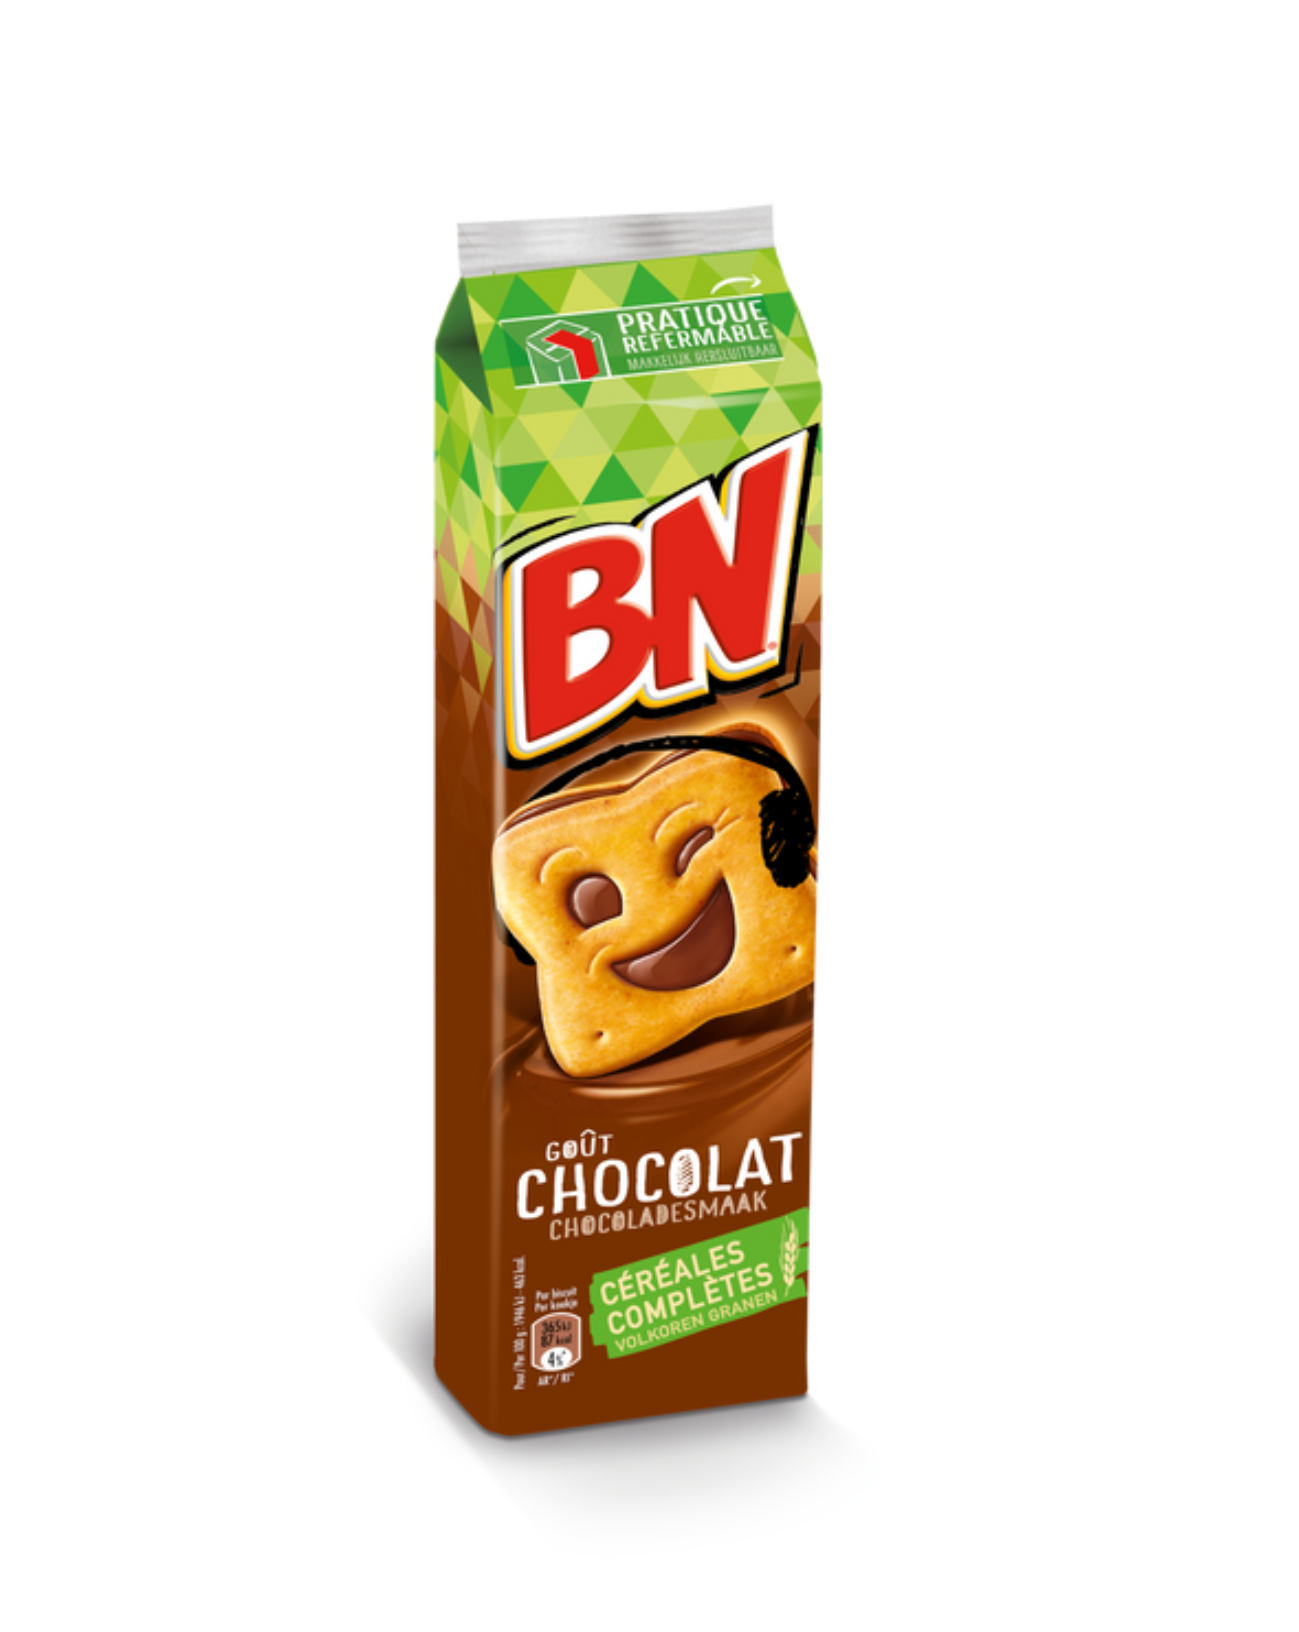 Bm Chocolate biscuit box with smiling blinking biscuit in chocolate illustration